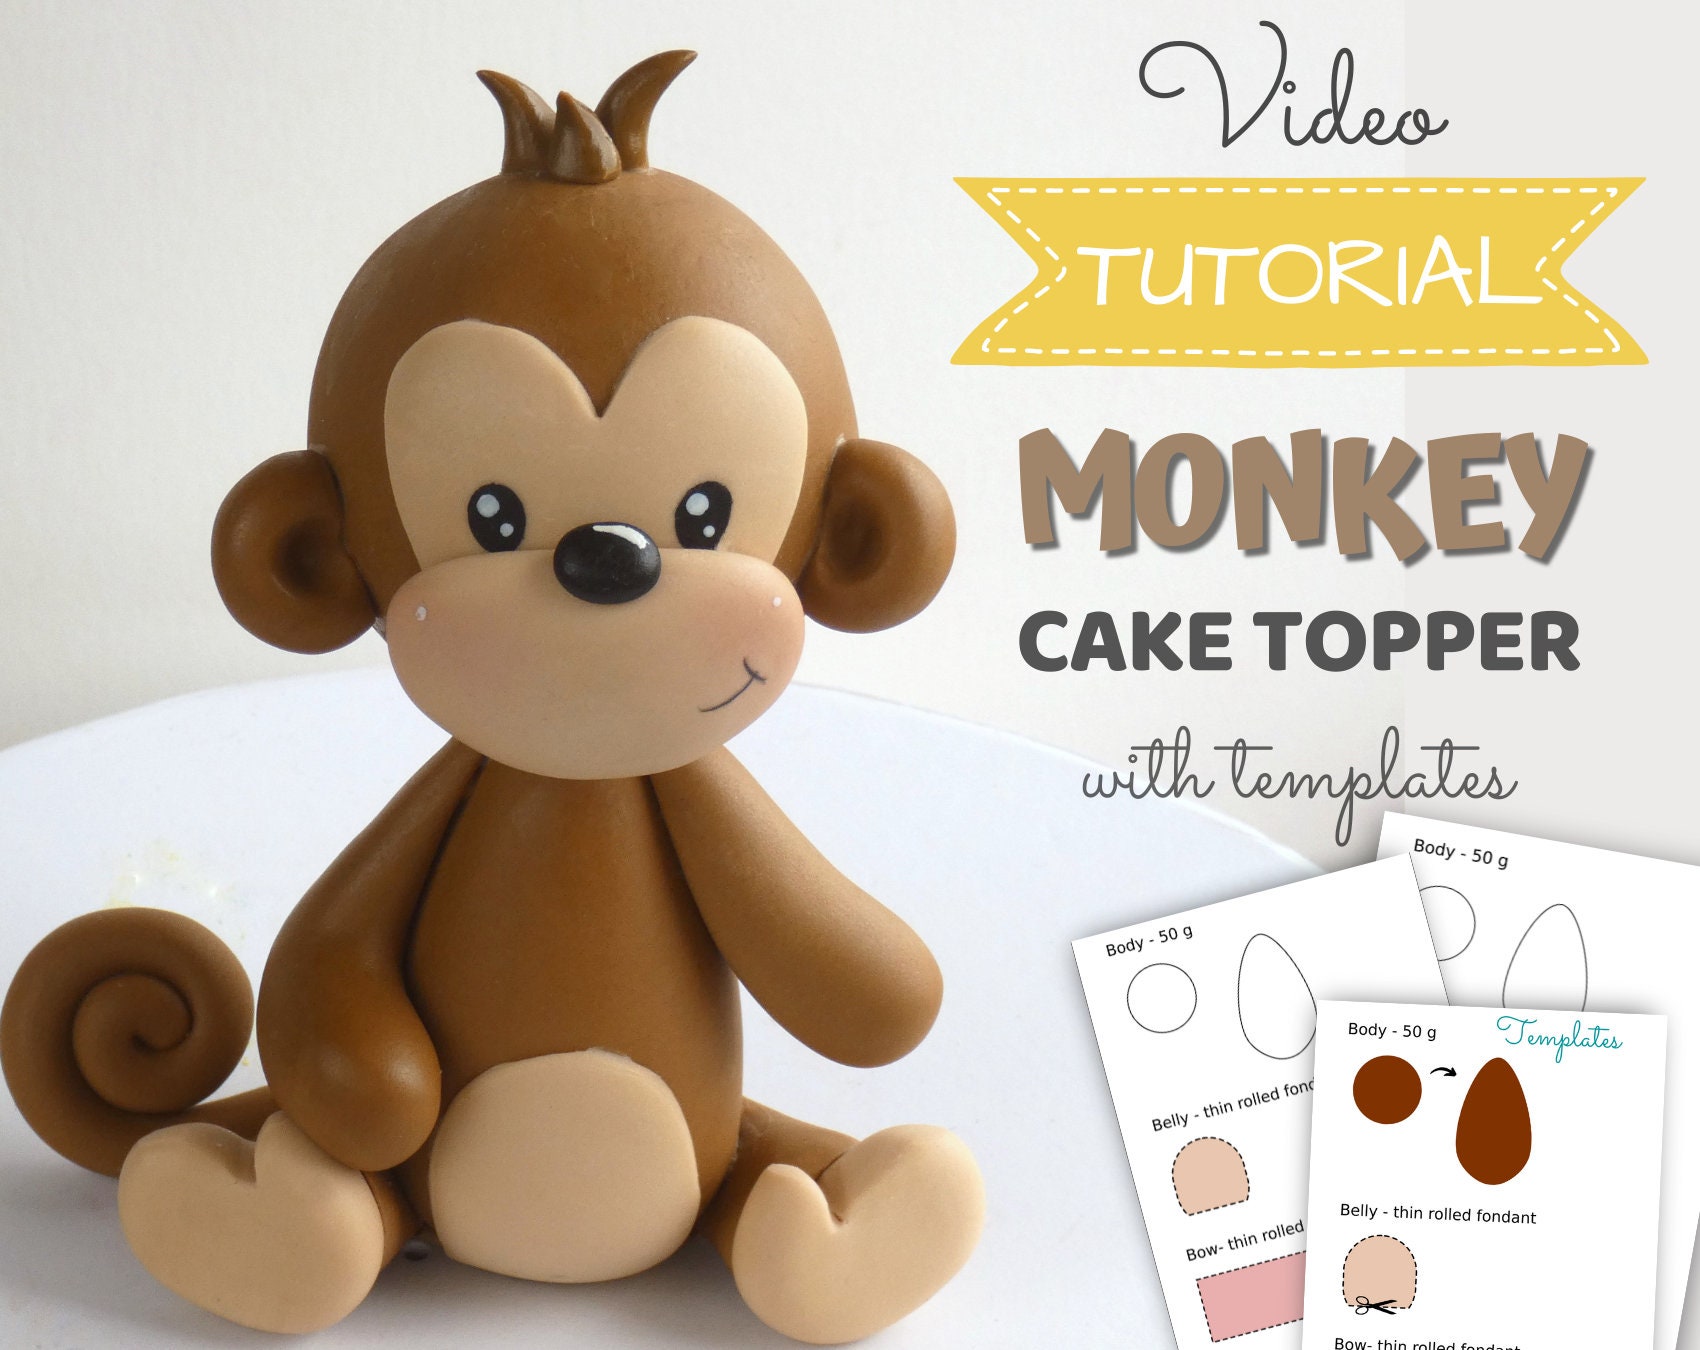 Monkey Cake Topper VIDEO Tutorial With Templates 